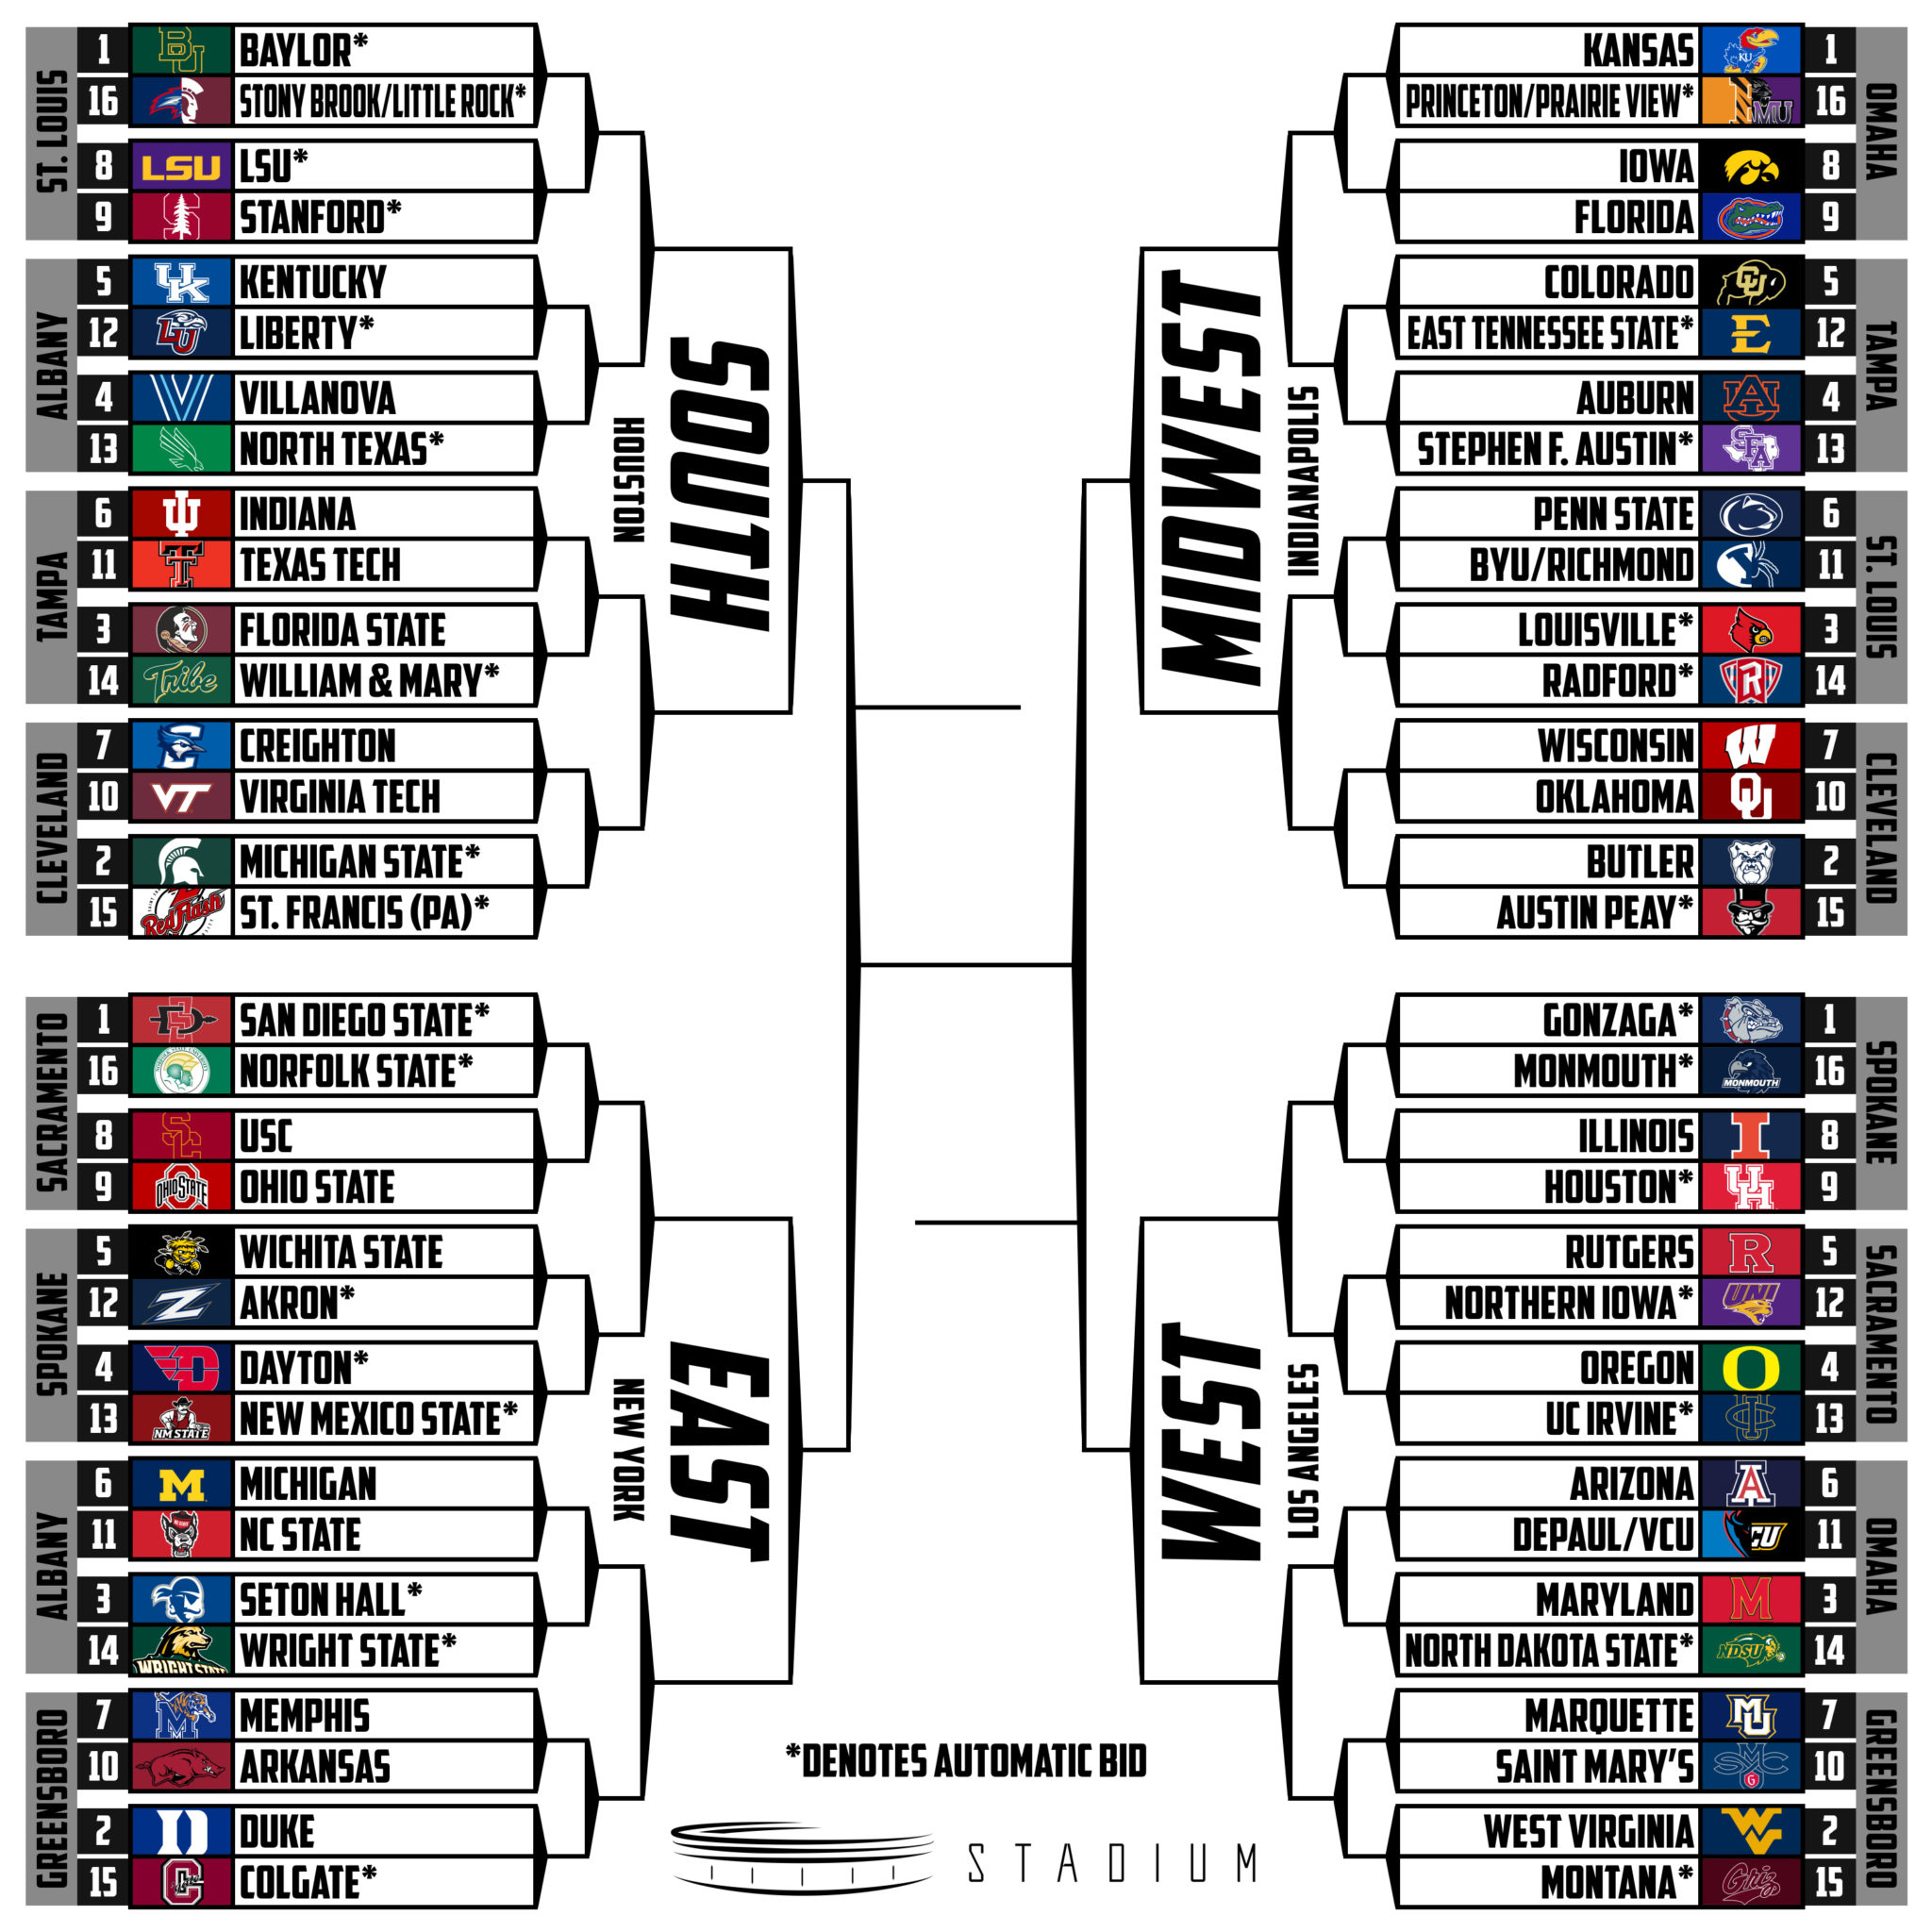 Heres What the March Madness Bracket Looks Like Right Now